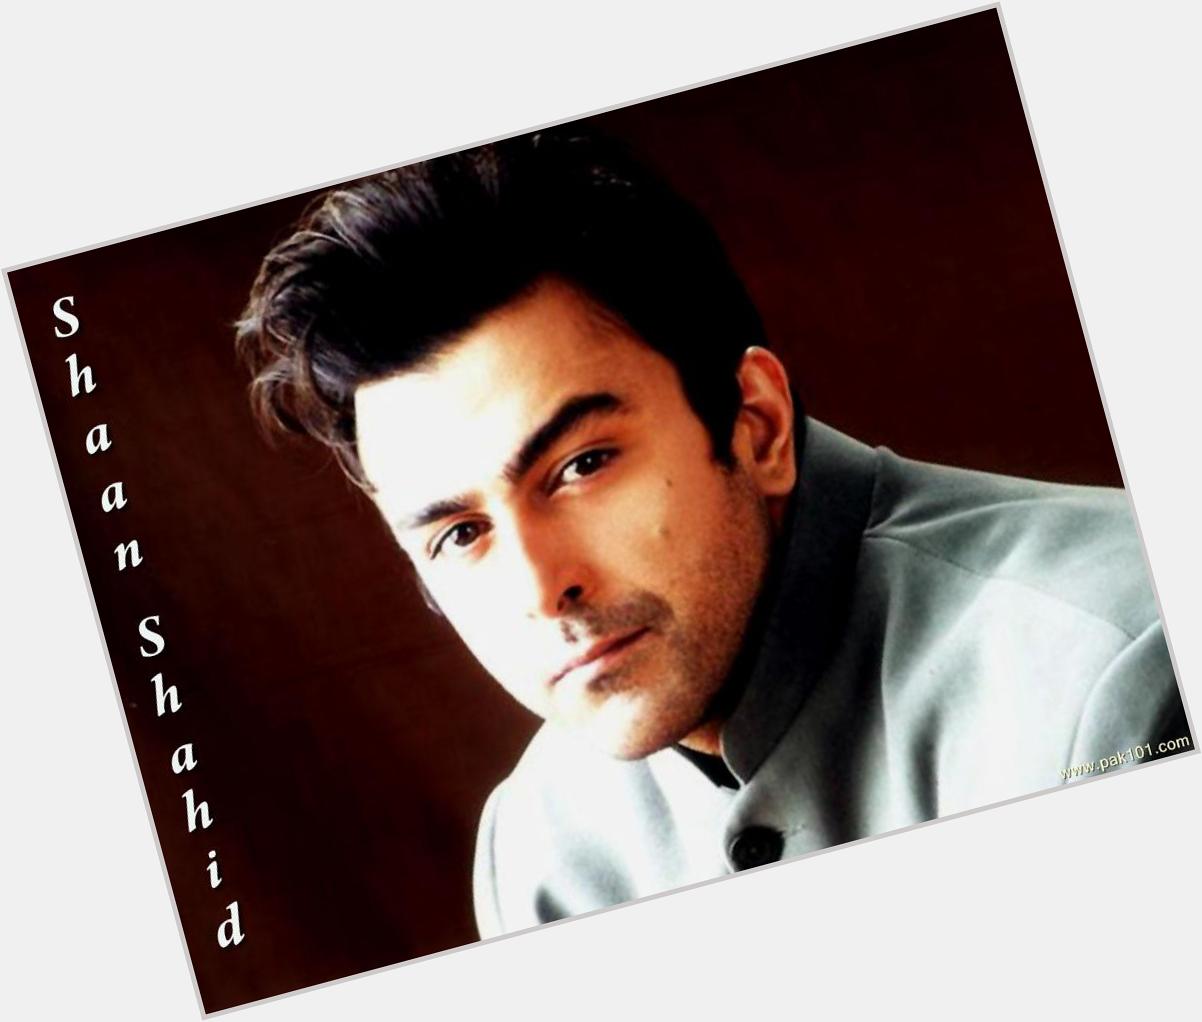 Https://fanpagepress.net/m/S/Shaan Shahid New Pic 1